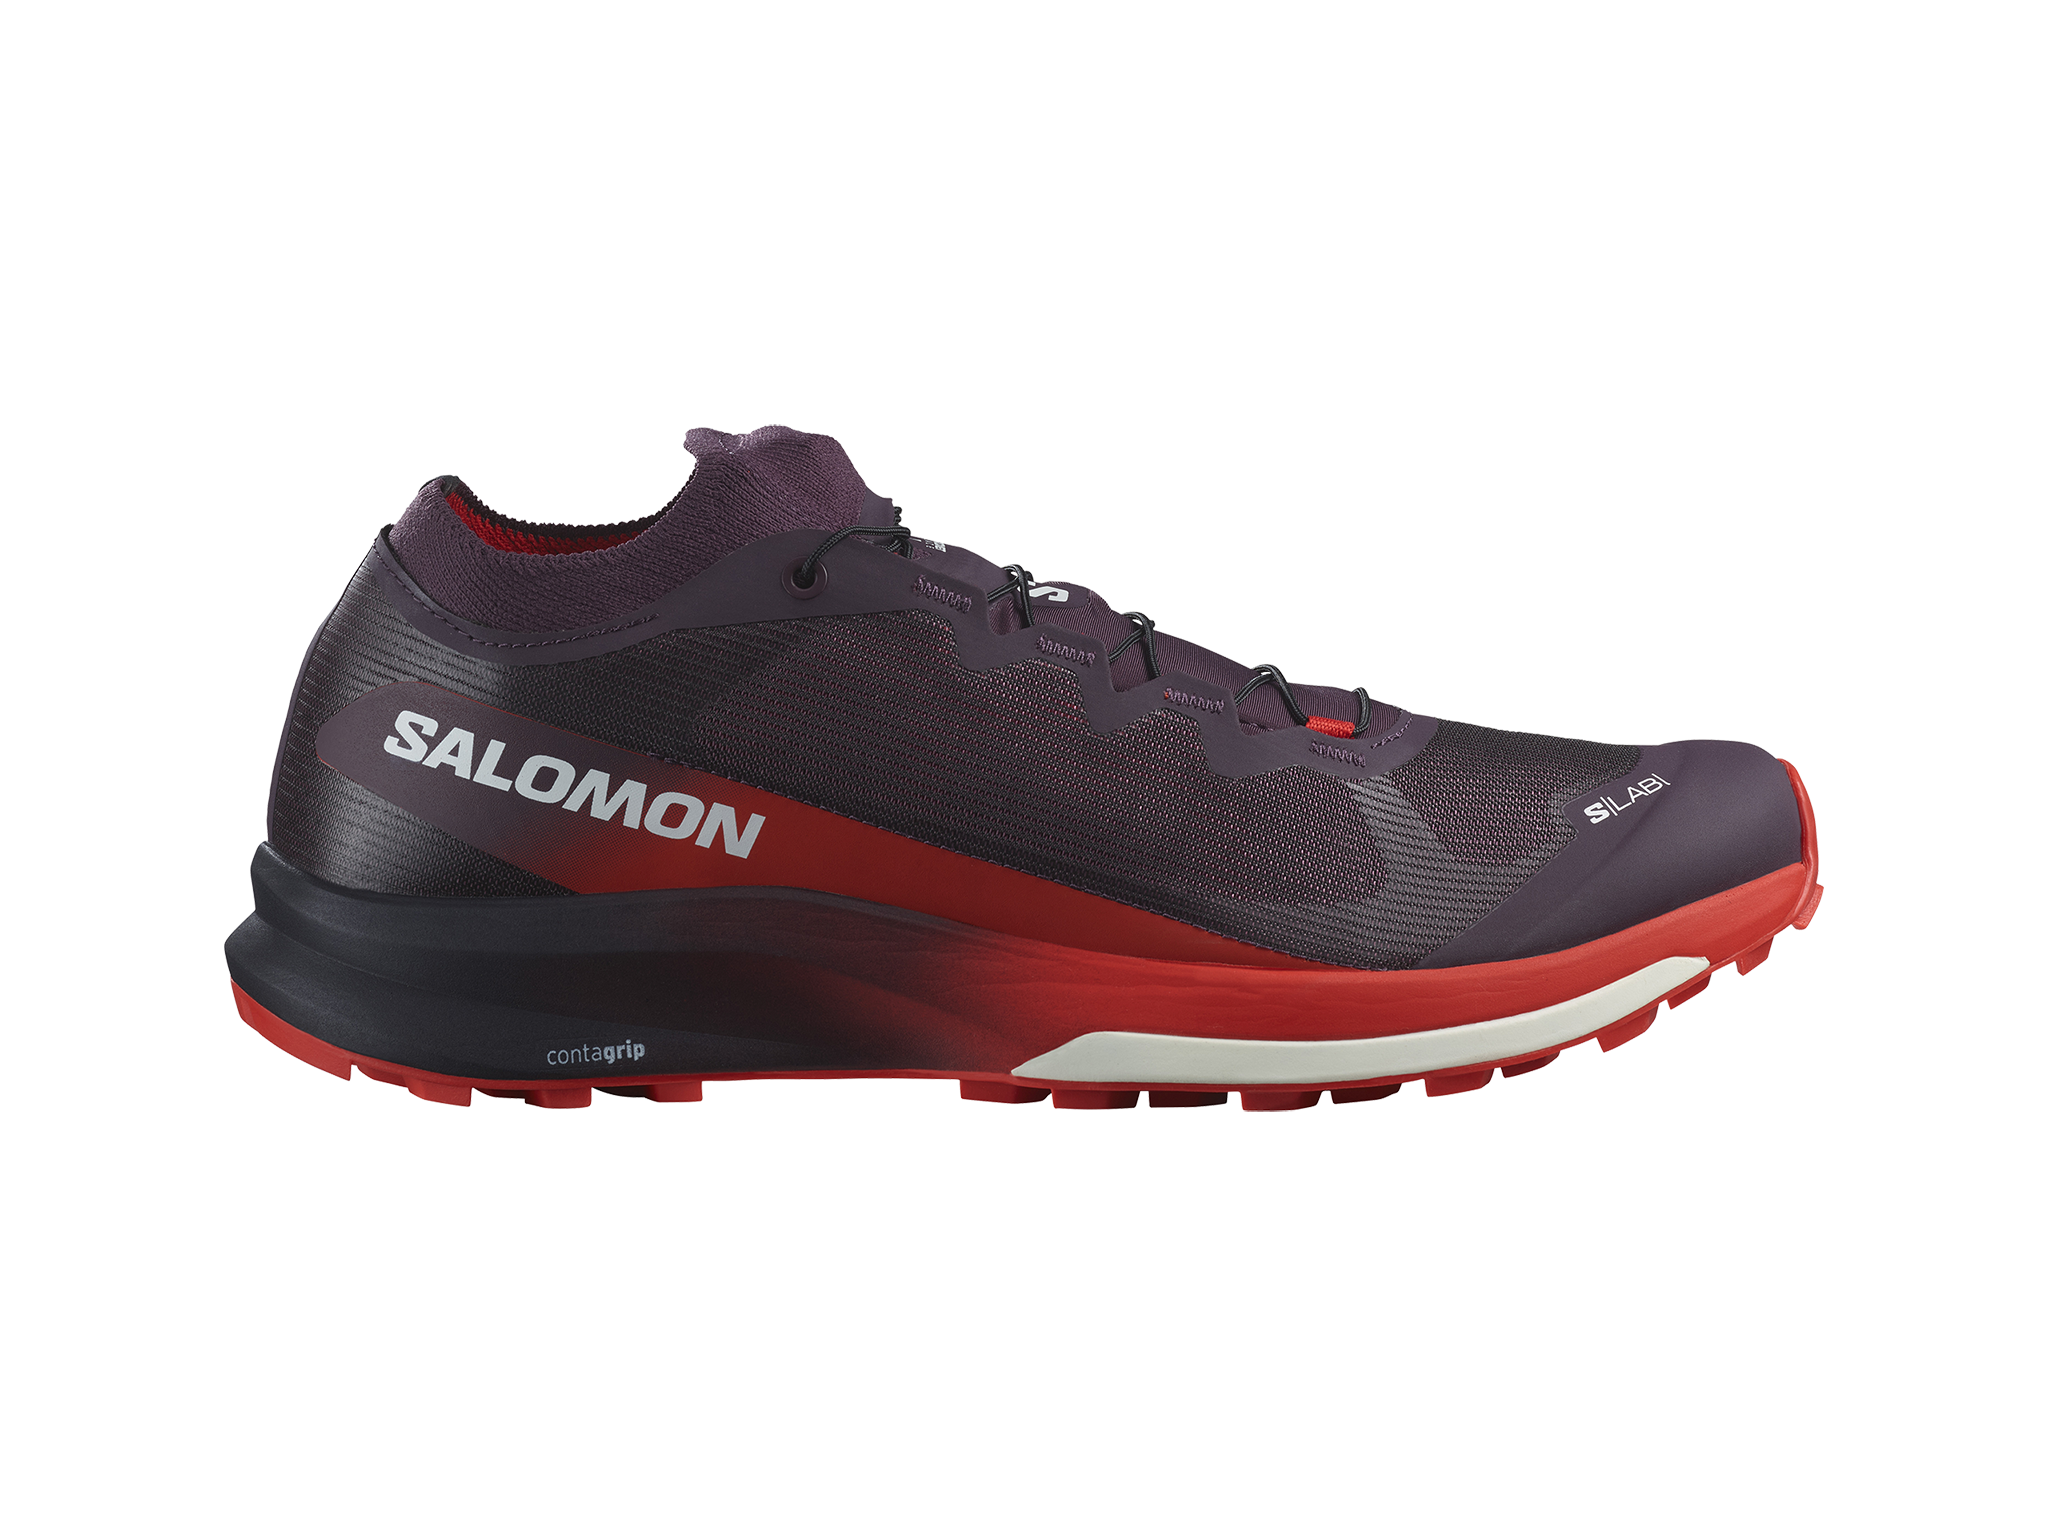 best women’s trail running shoes review Salomon S lab ultra 3